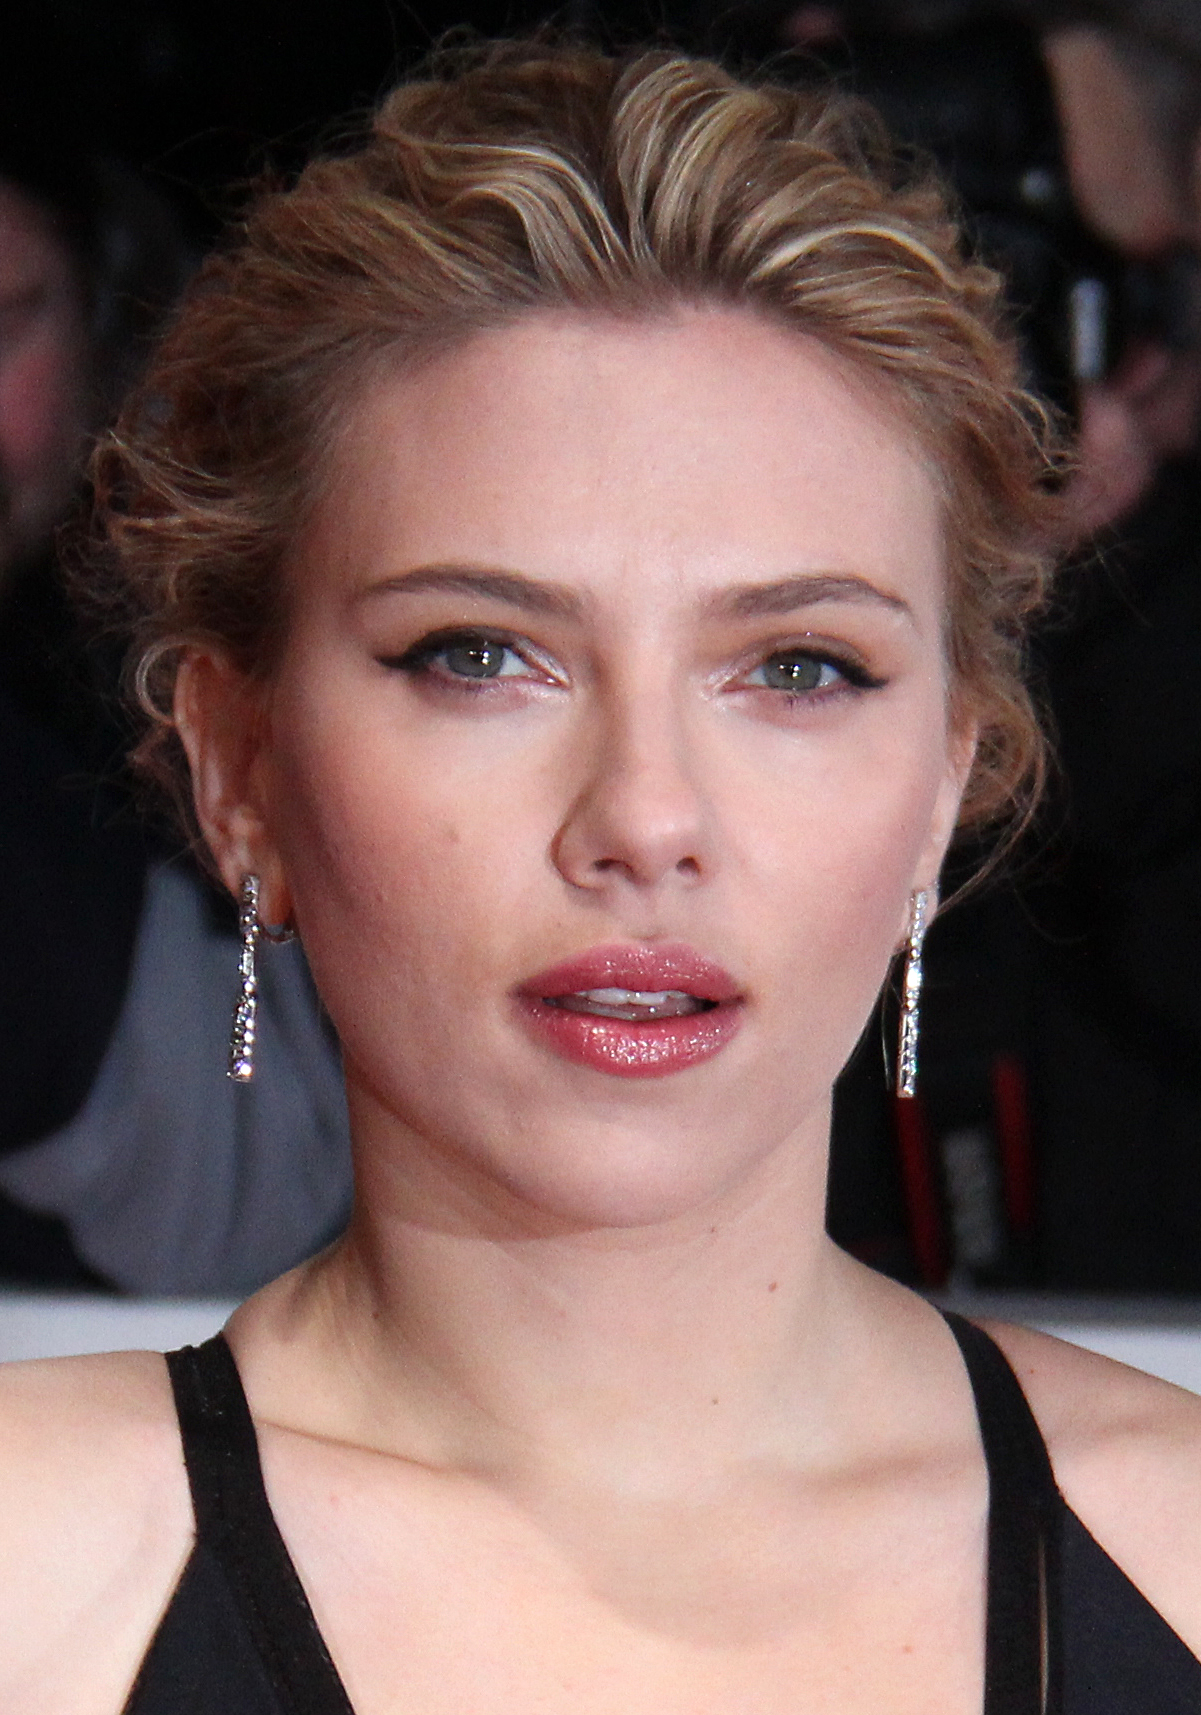 Should be able to play any person, tree, animal: Scarlett Johansson on casting